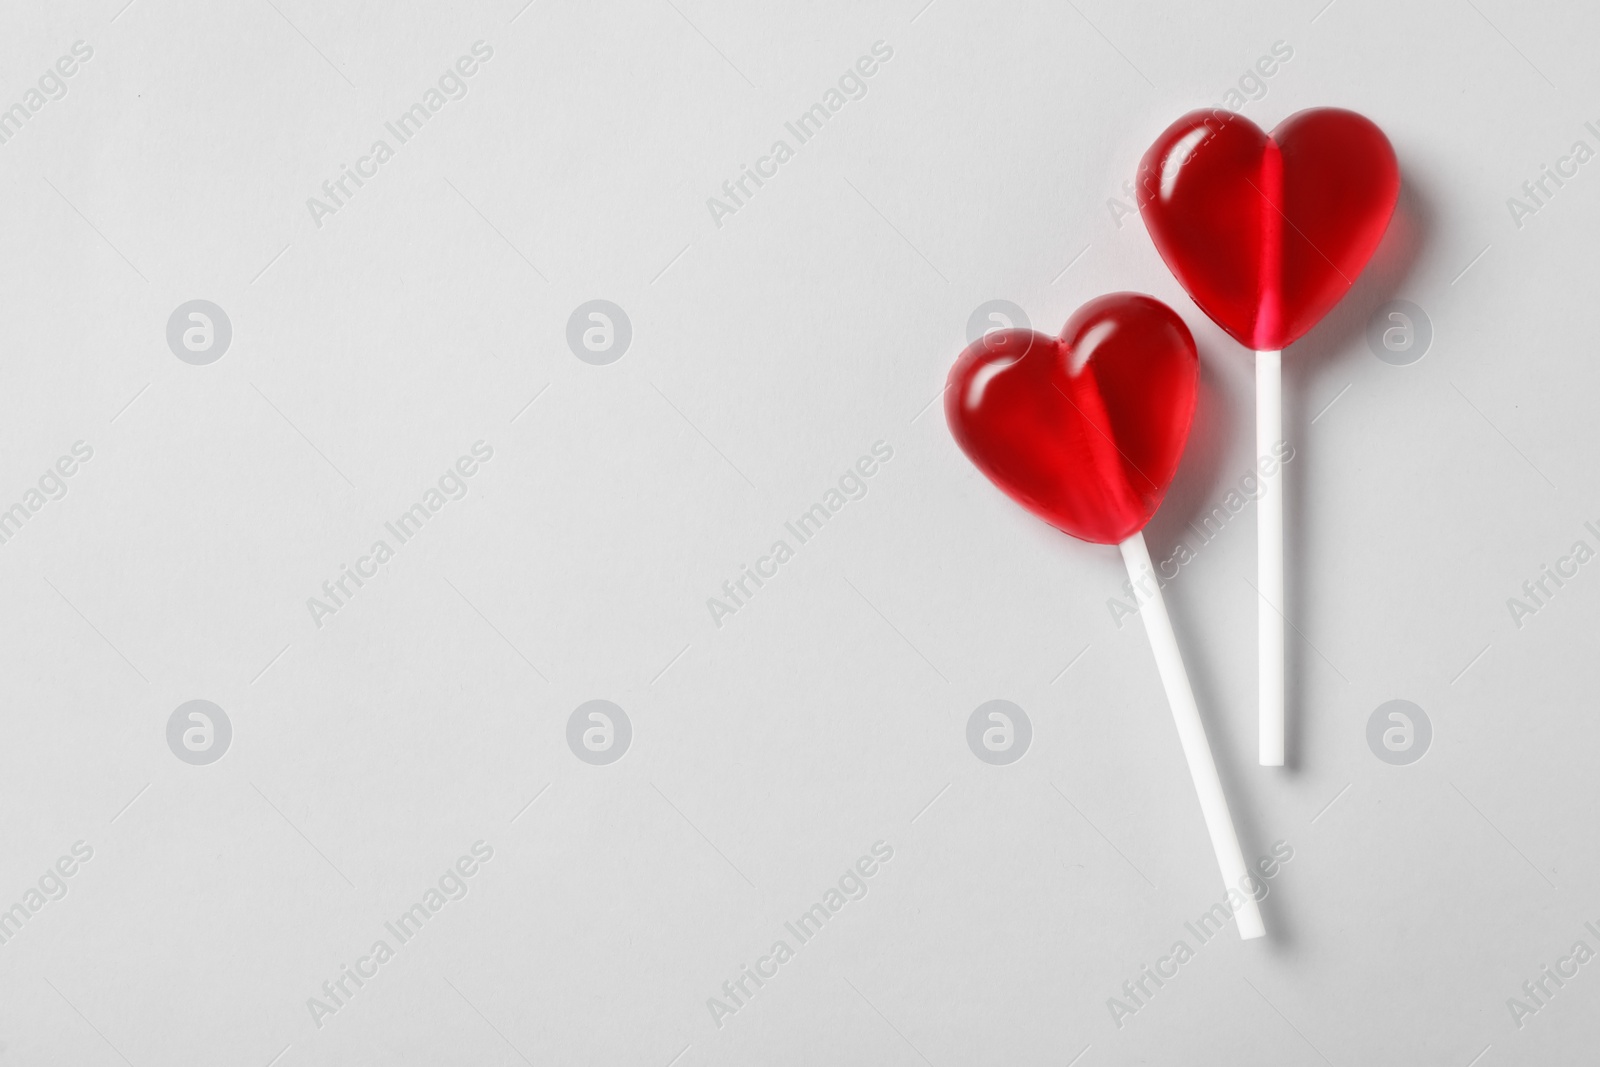 Photo of Sweet heart shaped lollipops on light grey background, flat lay with space for text. Valentine's day celebration